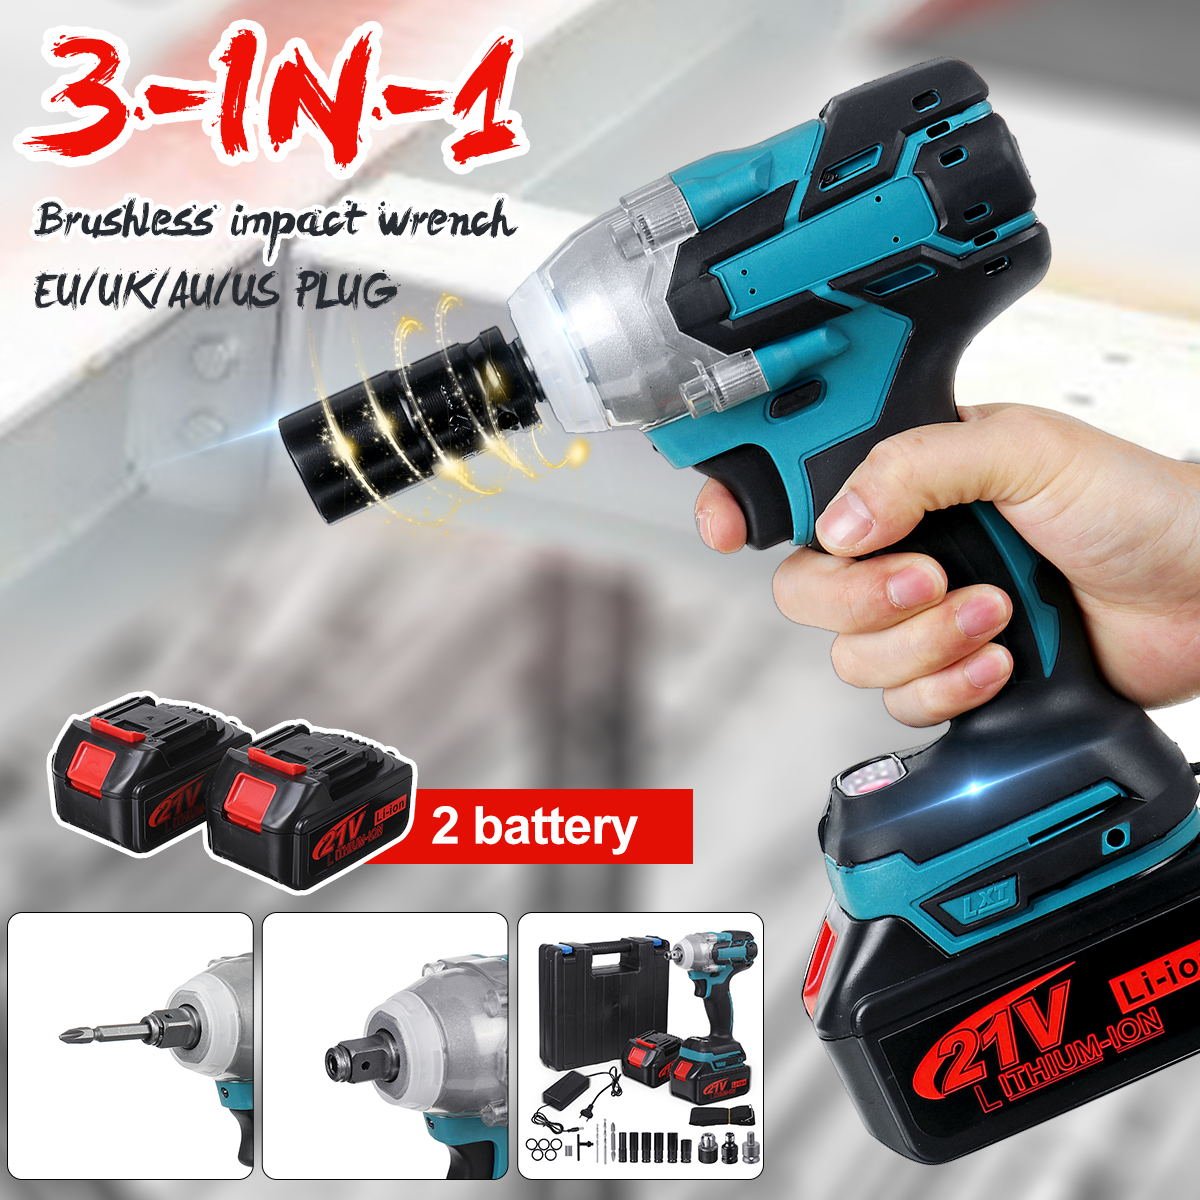 3-IN-1-Brushless-Impact-Wrench-Kit-W-2PCS-Battery--14quot-Screwdriver-Drill-LED-Light-1849692-1